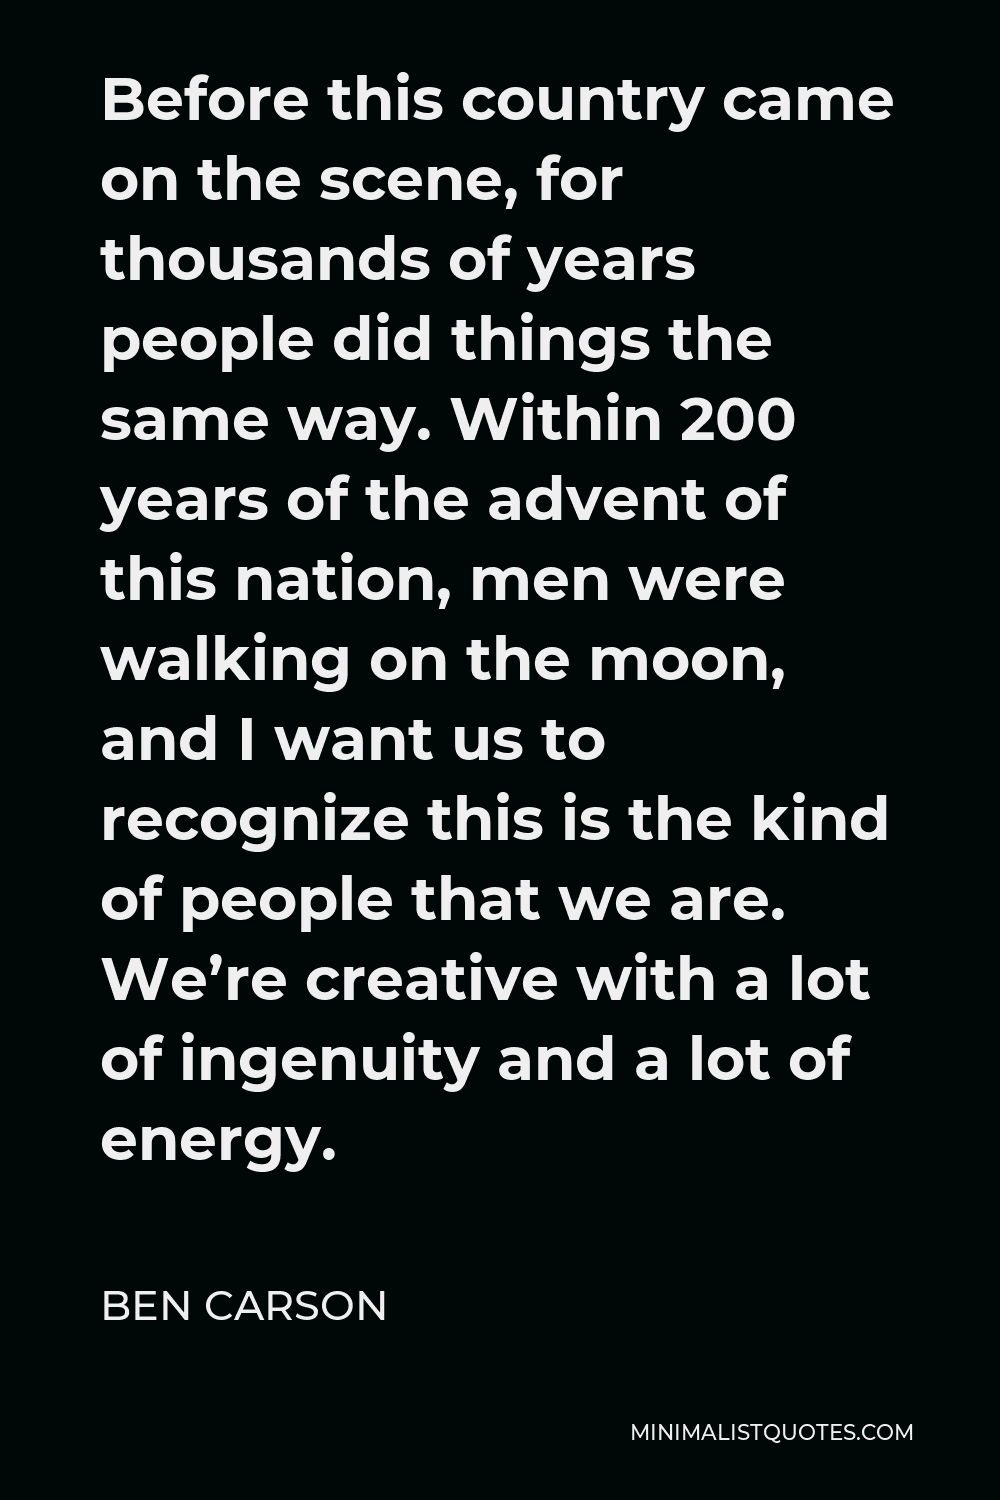 Ben Carson Quote - Before this country came on the scene, for thousands of years people did things the same way. Within 200 years of the advent of this nation, men were walking on the moon, and I want us to recognize this is the kind of people that we are. We’re creative with a lot of ingenuity and a lot of energy.